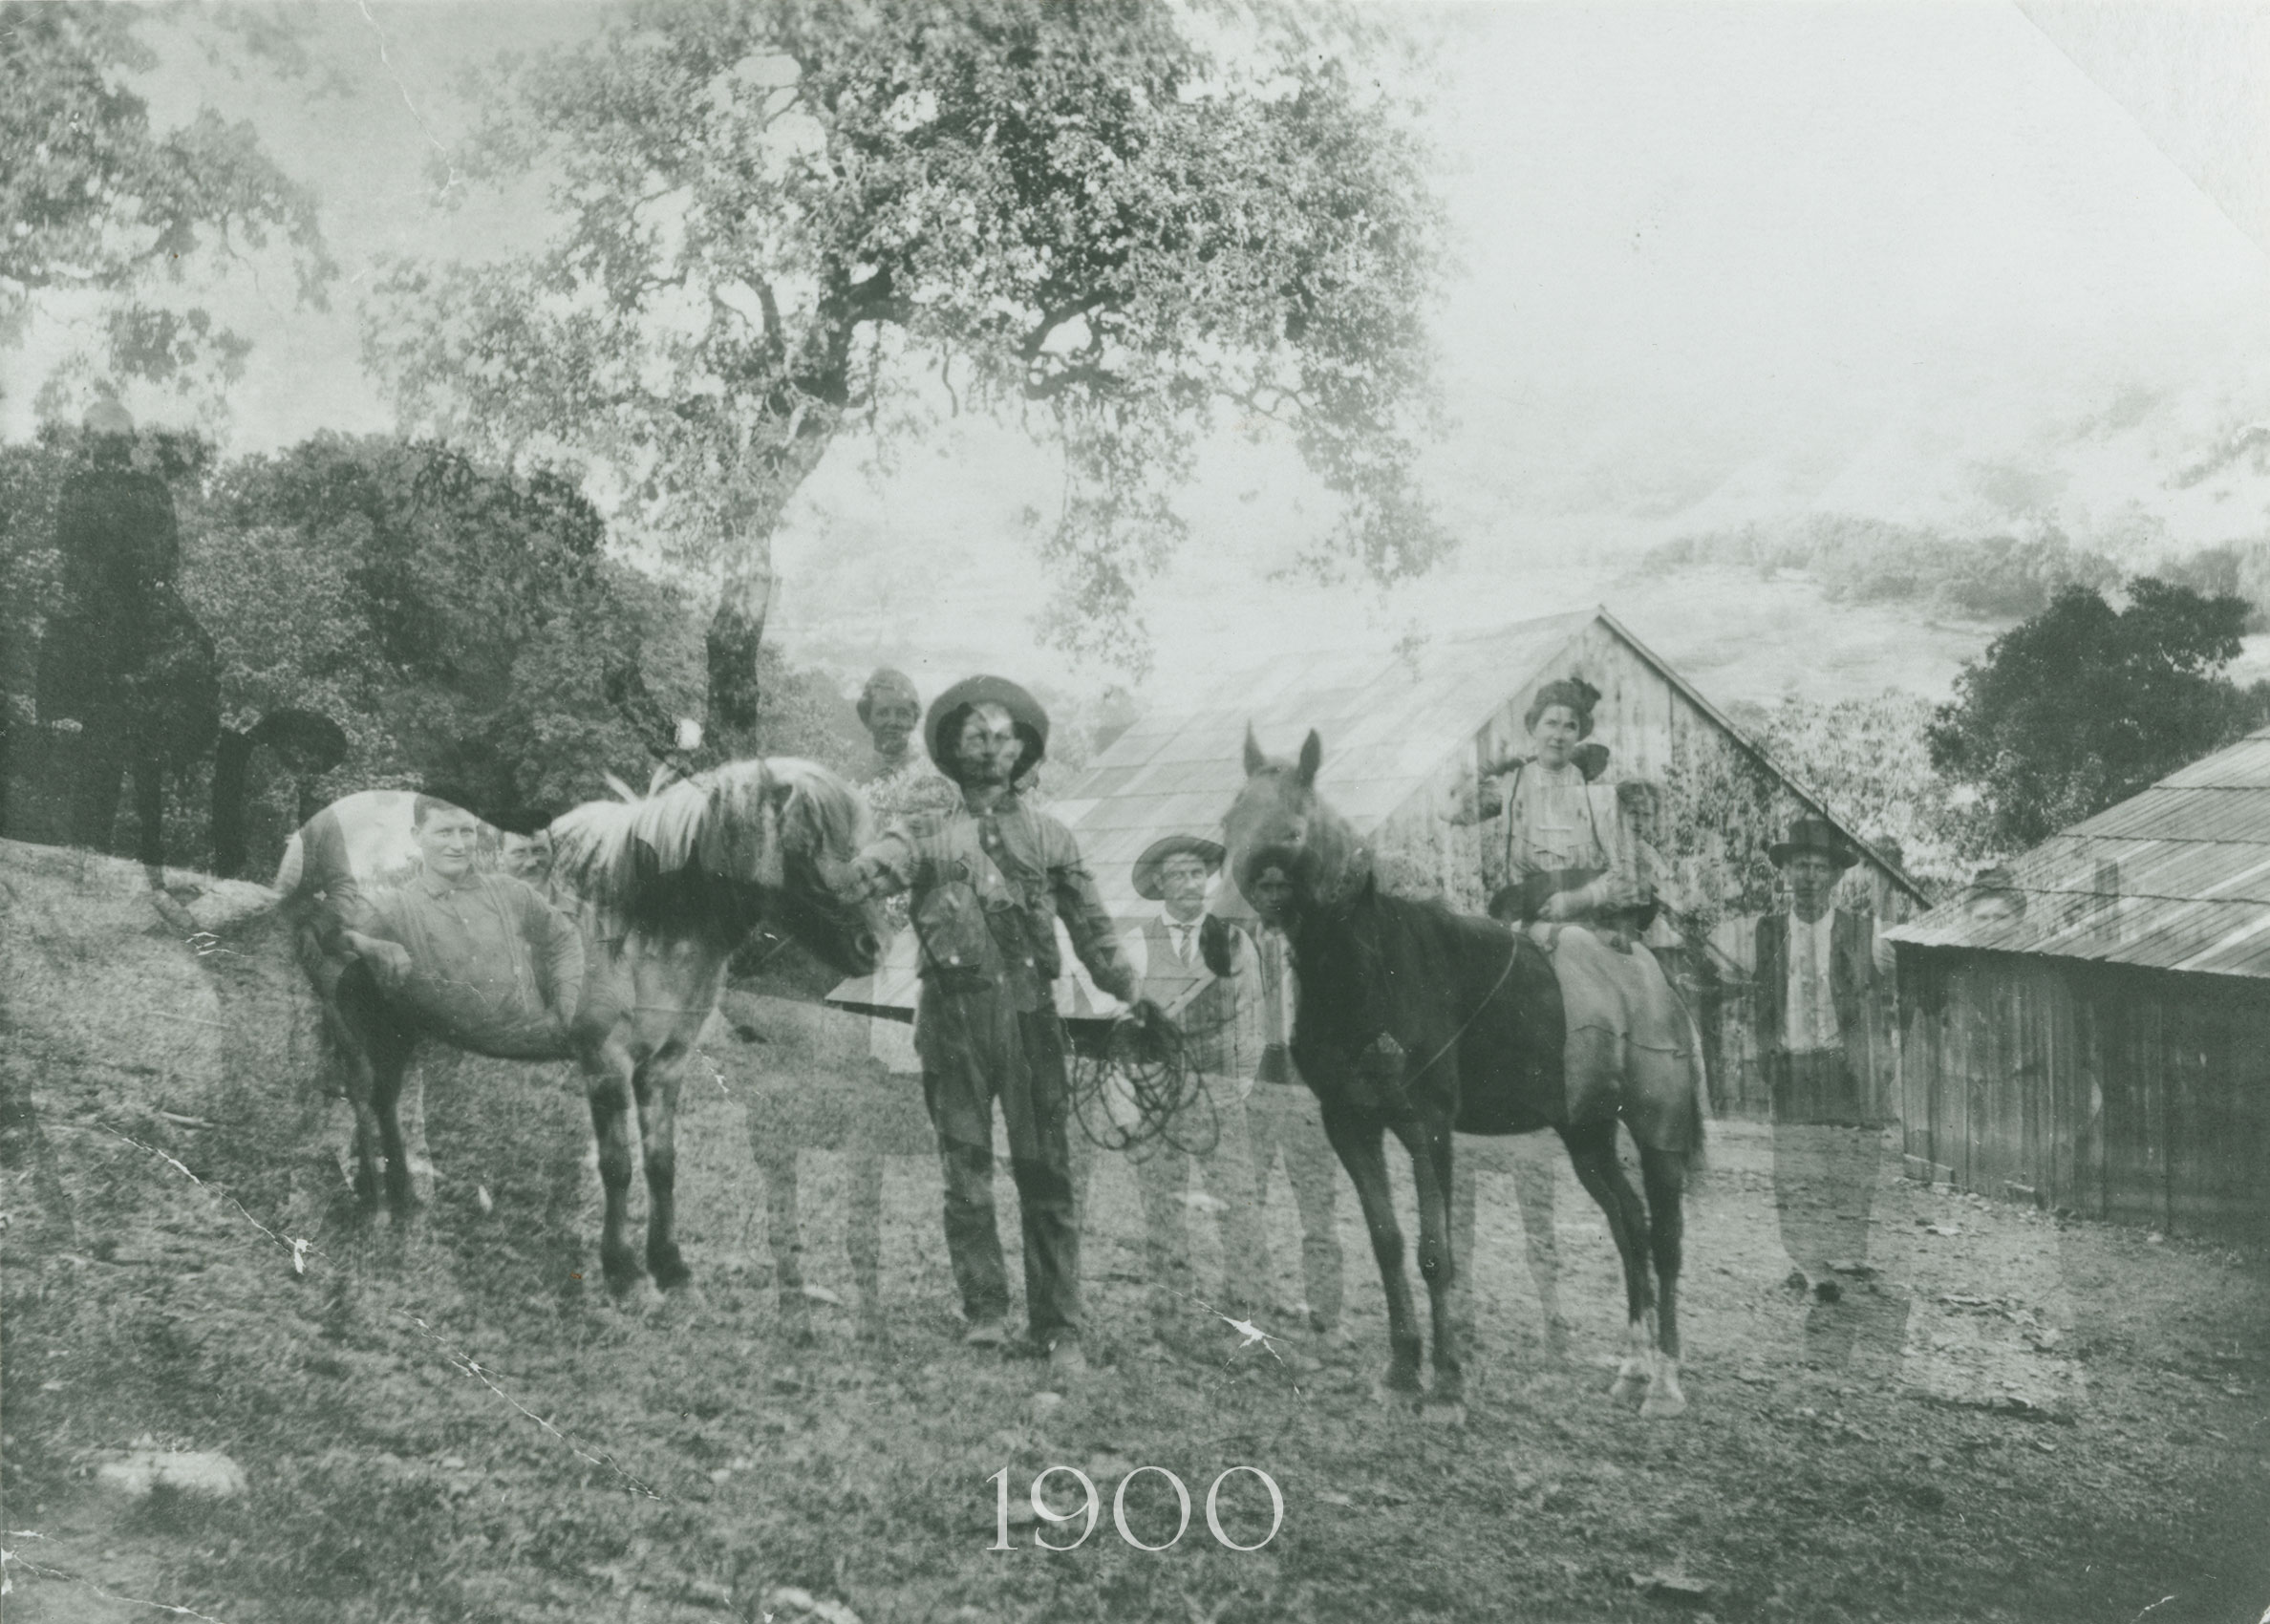 History of Cain: a double exposure from 1900 makes for a ghostly group